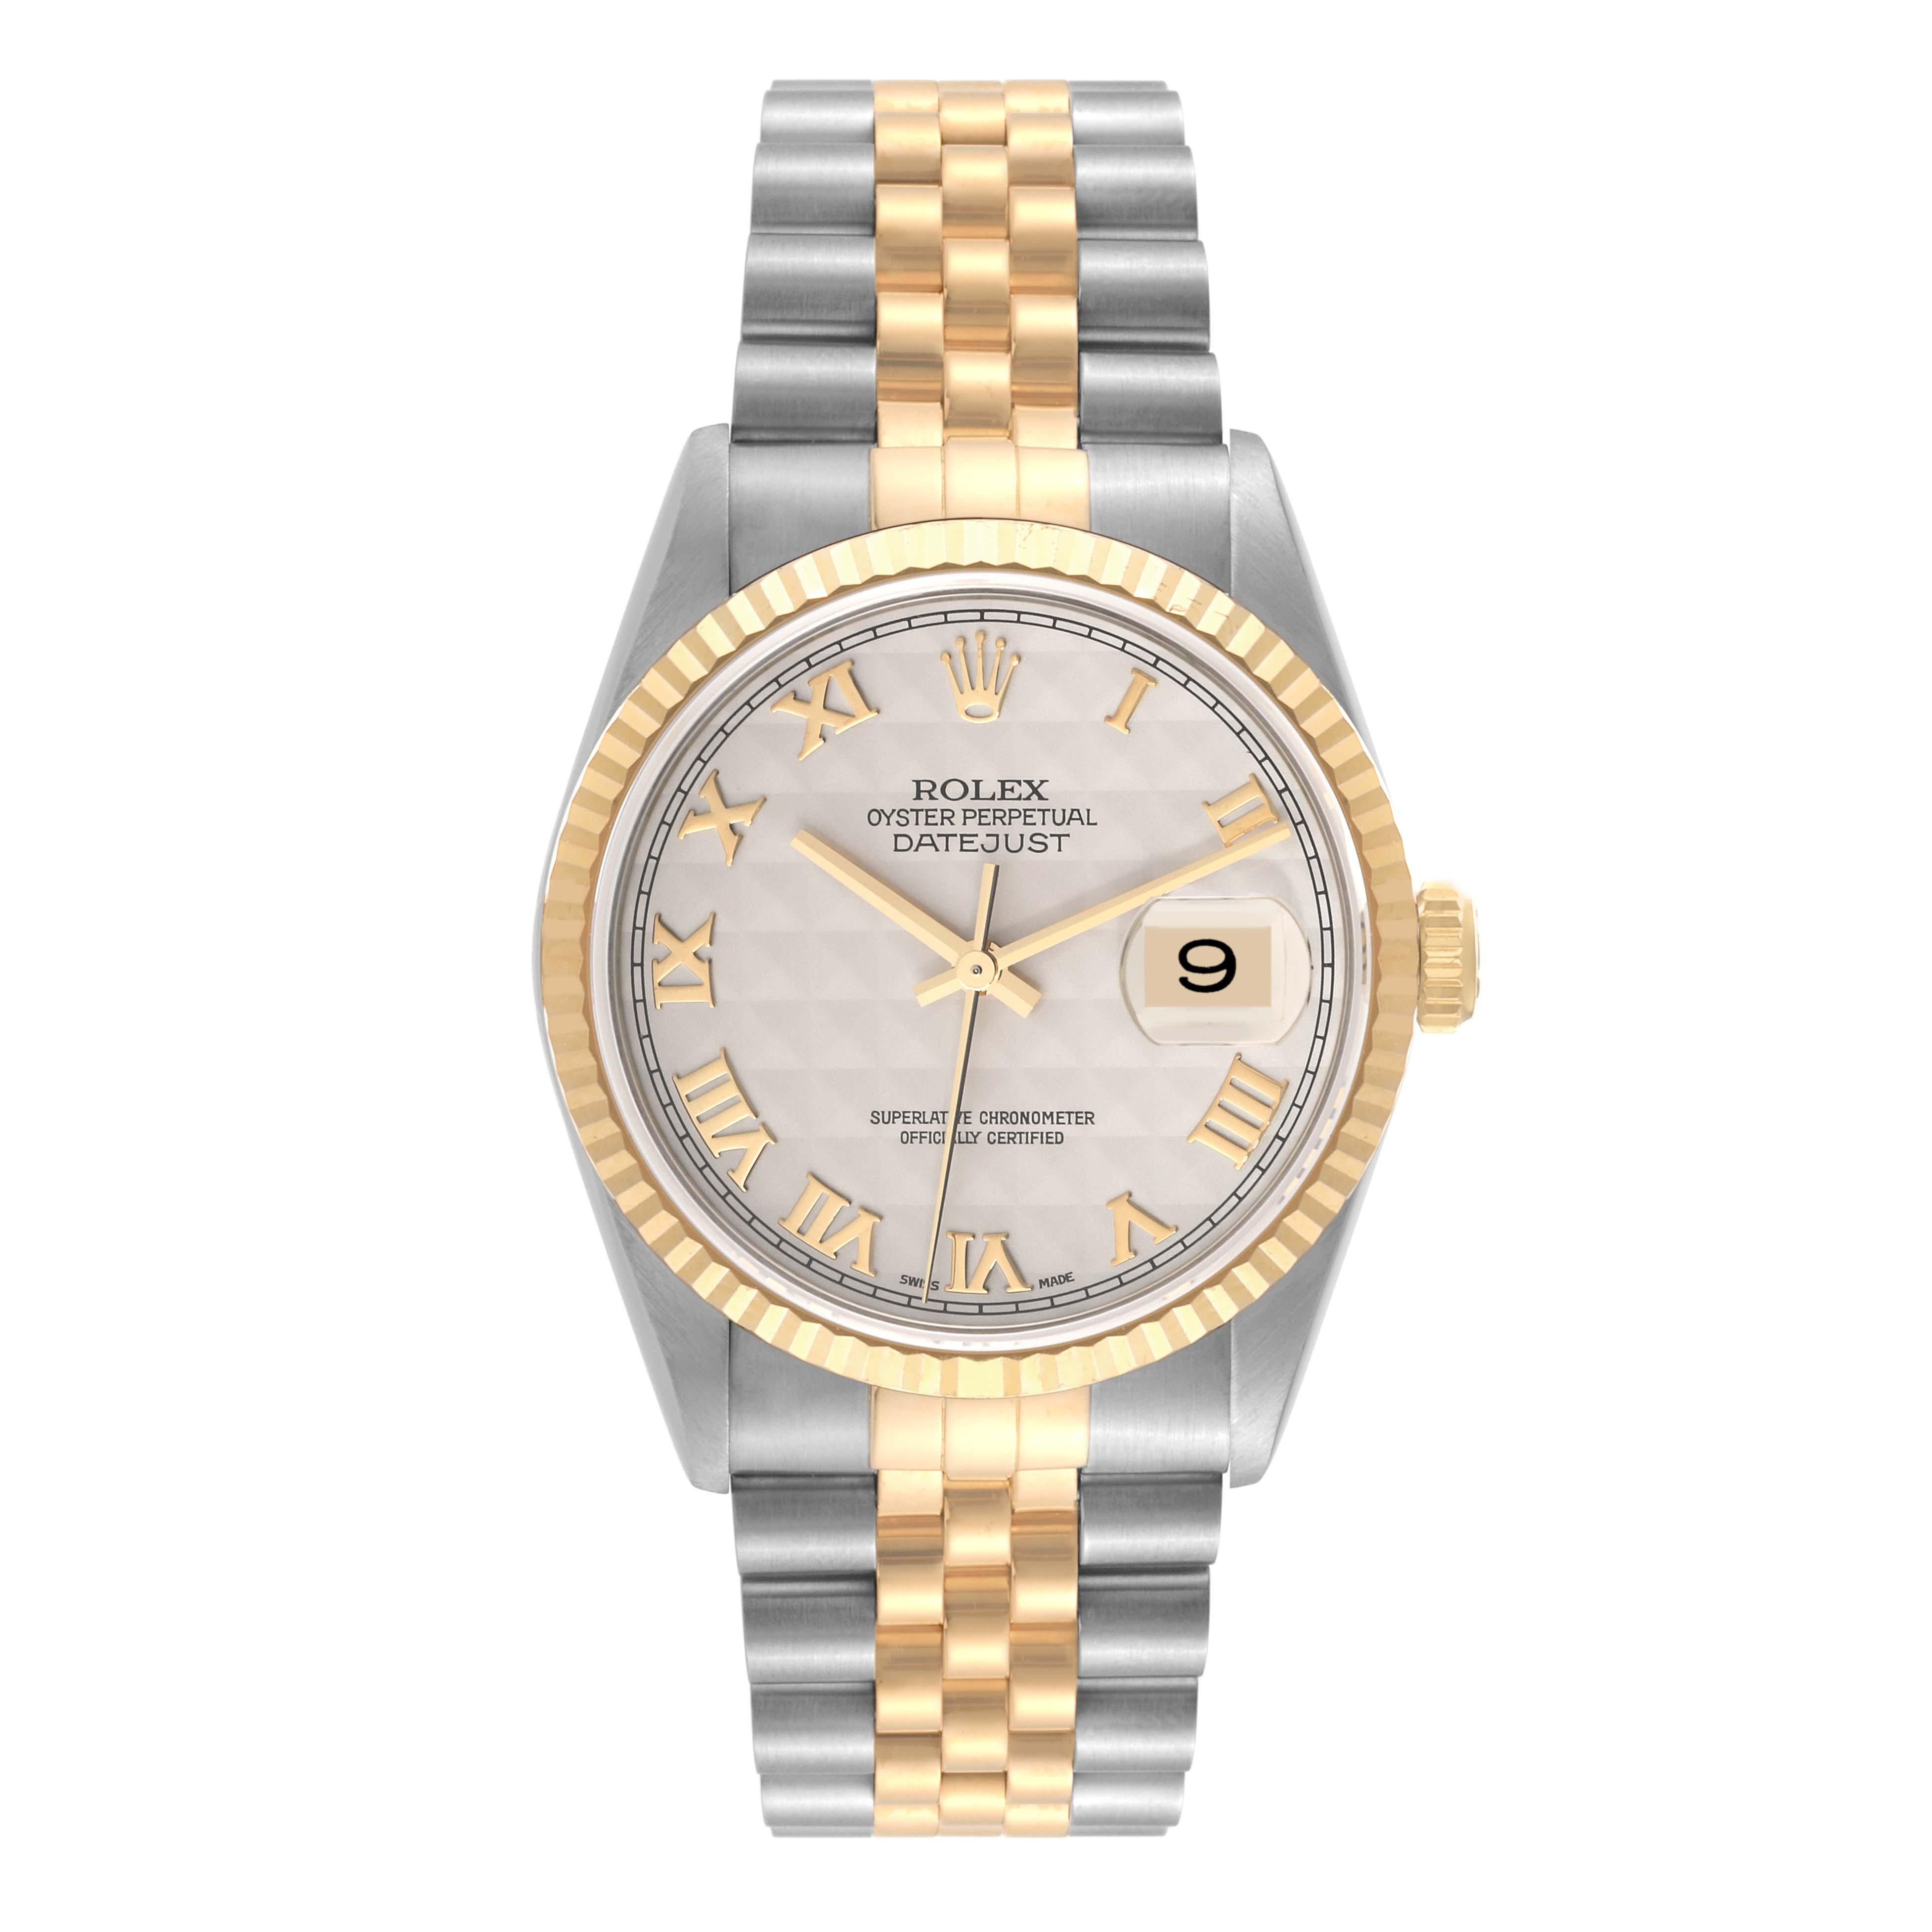 Rolex Datejust Steel Yellow Gold Ivory Pyramid Dial Mens Watch 16233 Box Papers en vente 5